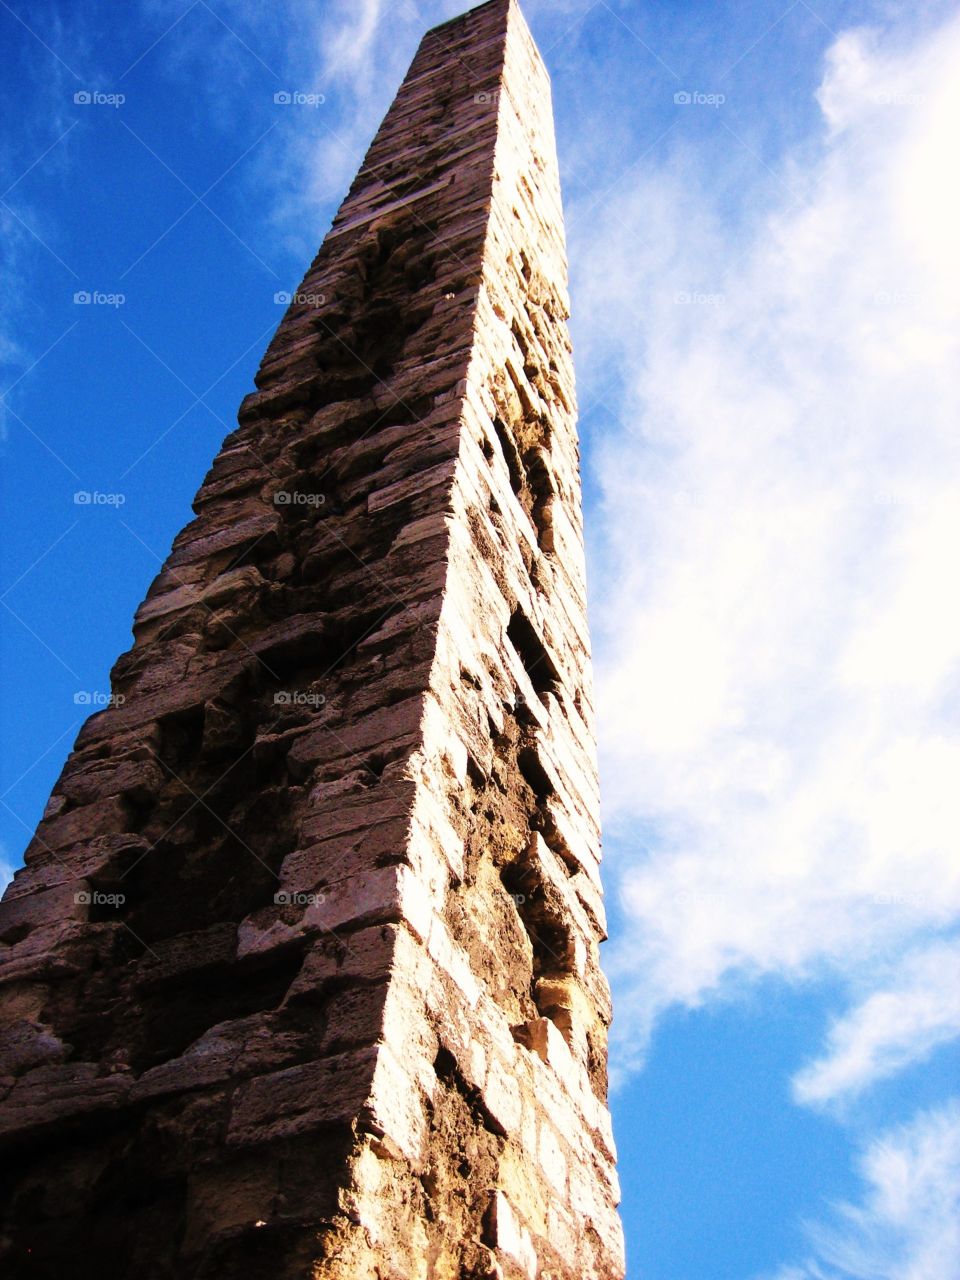 Monolith looking up